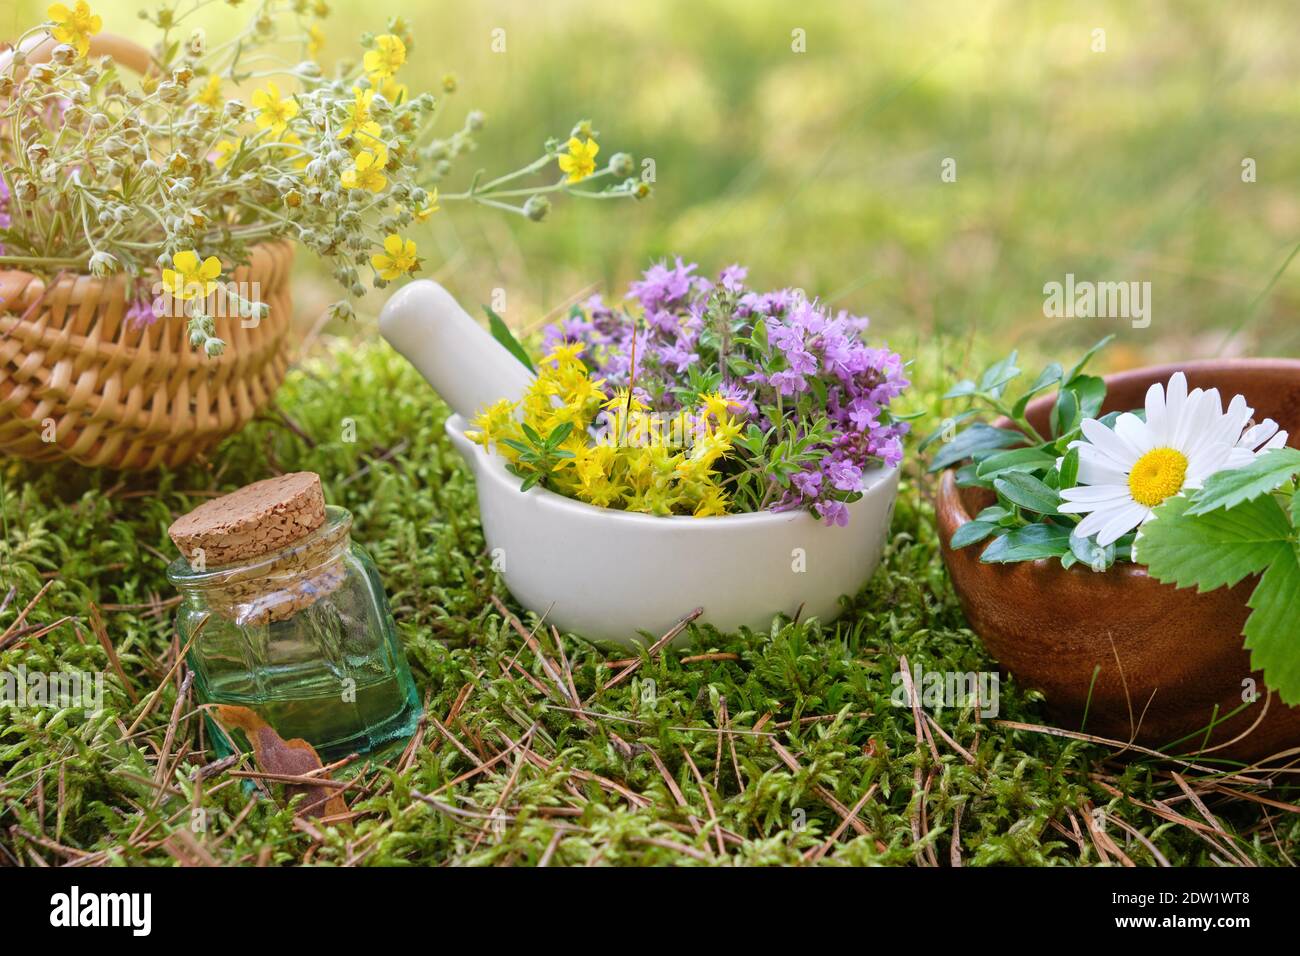 Bottle of essential oil, mortar of thyme and sedum flowers, basket of medicinal herbs on moss in forest outdoors. Alternative medicine. Stock Photo